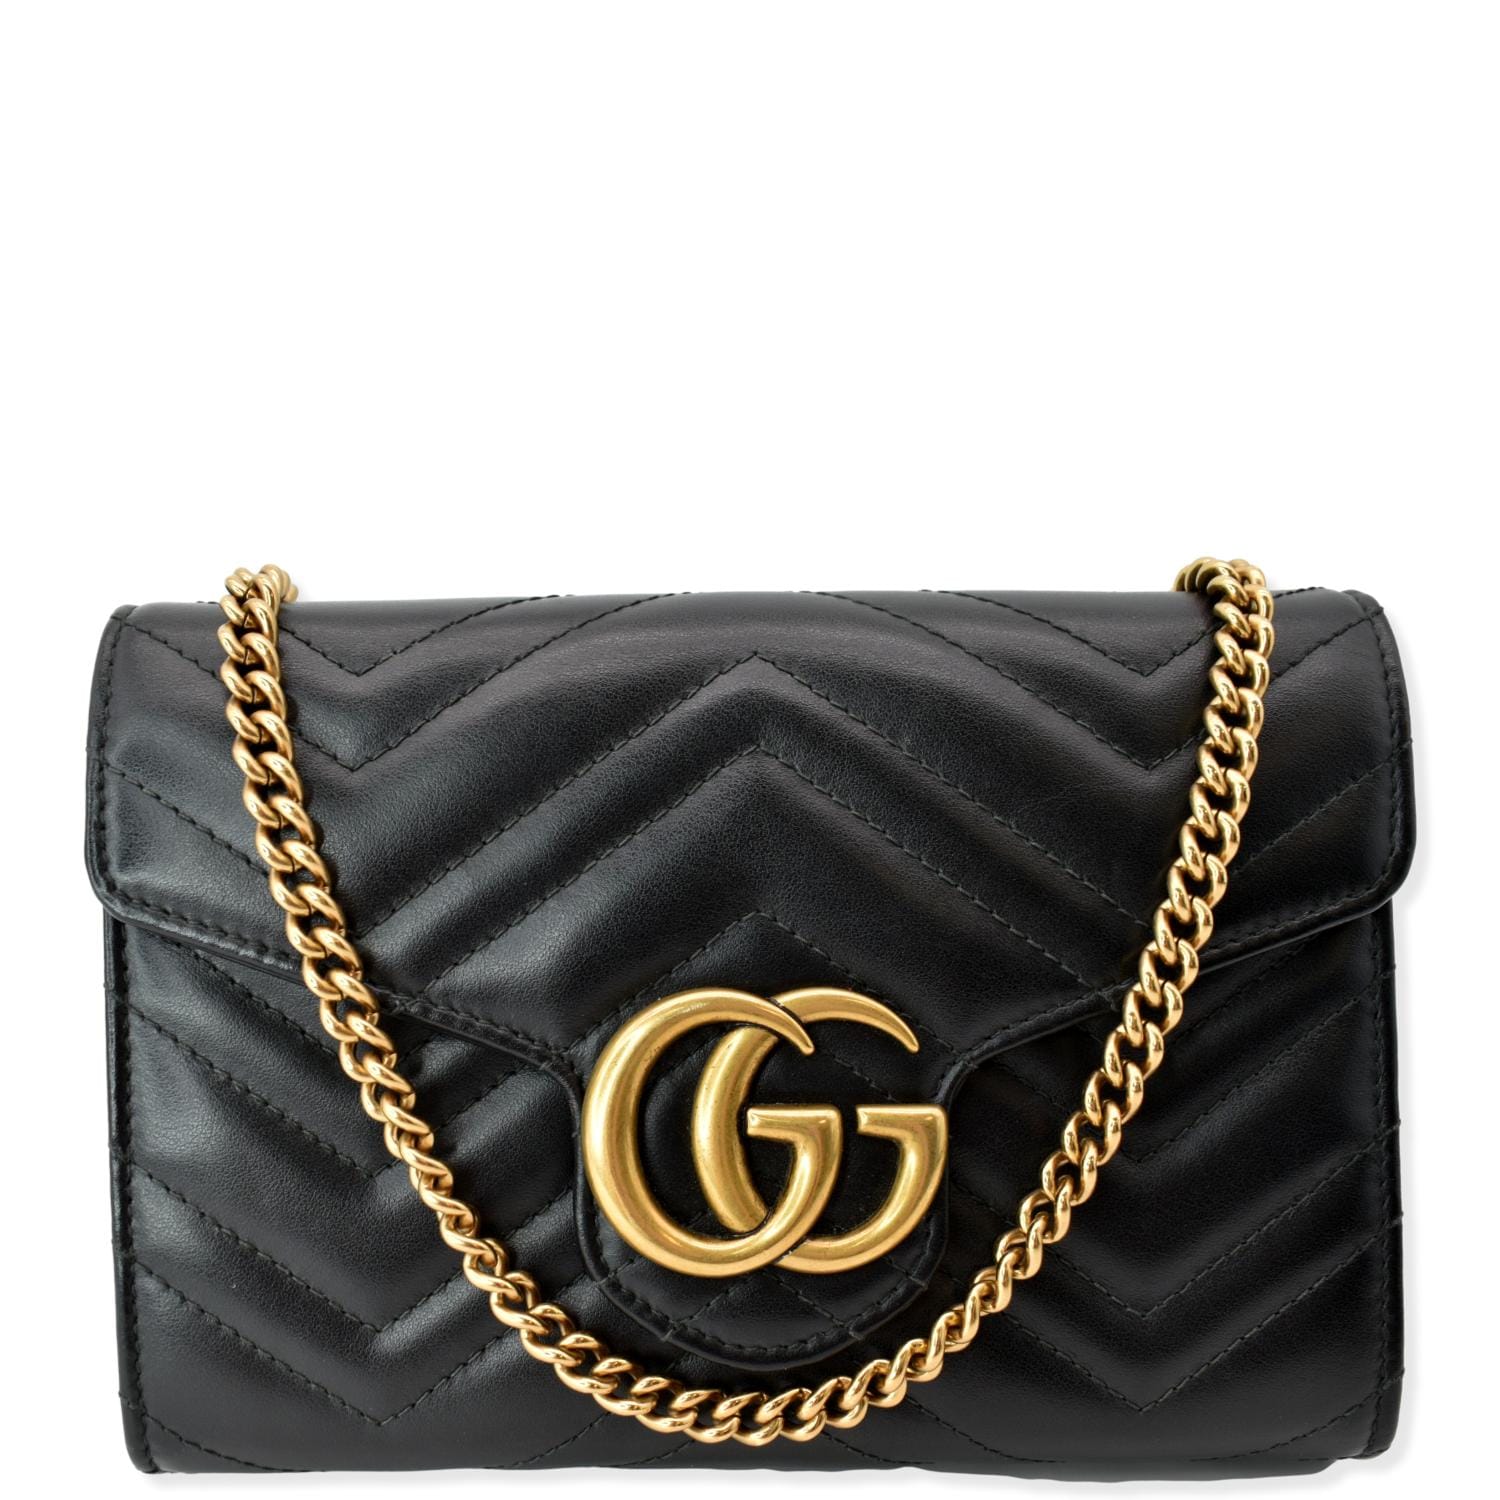 Gucci - GG Marmont Nutmeg Leather Flap Small Shoulder Bag